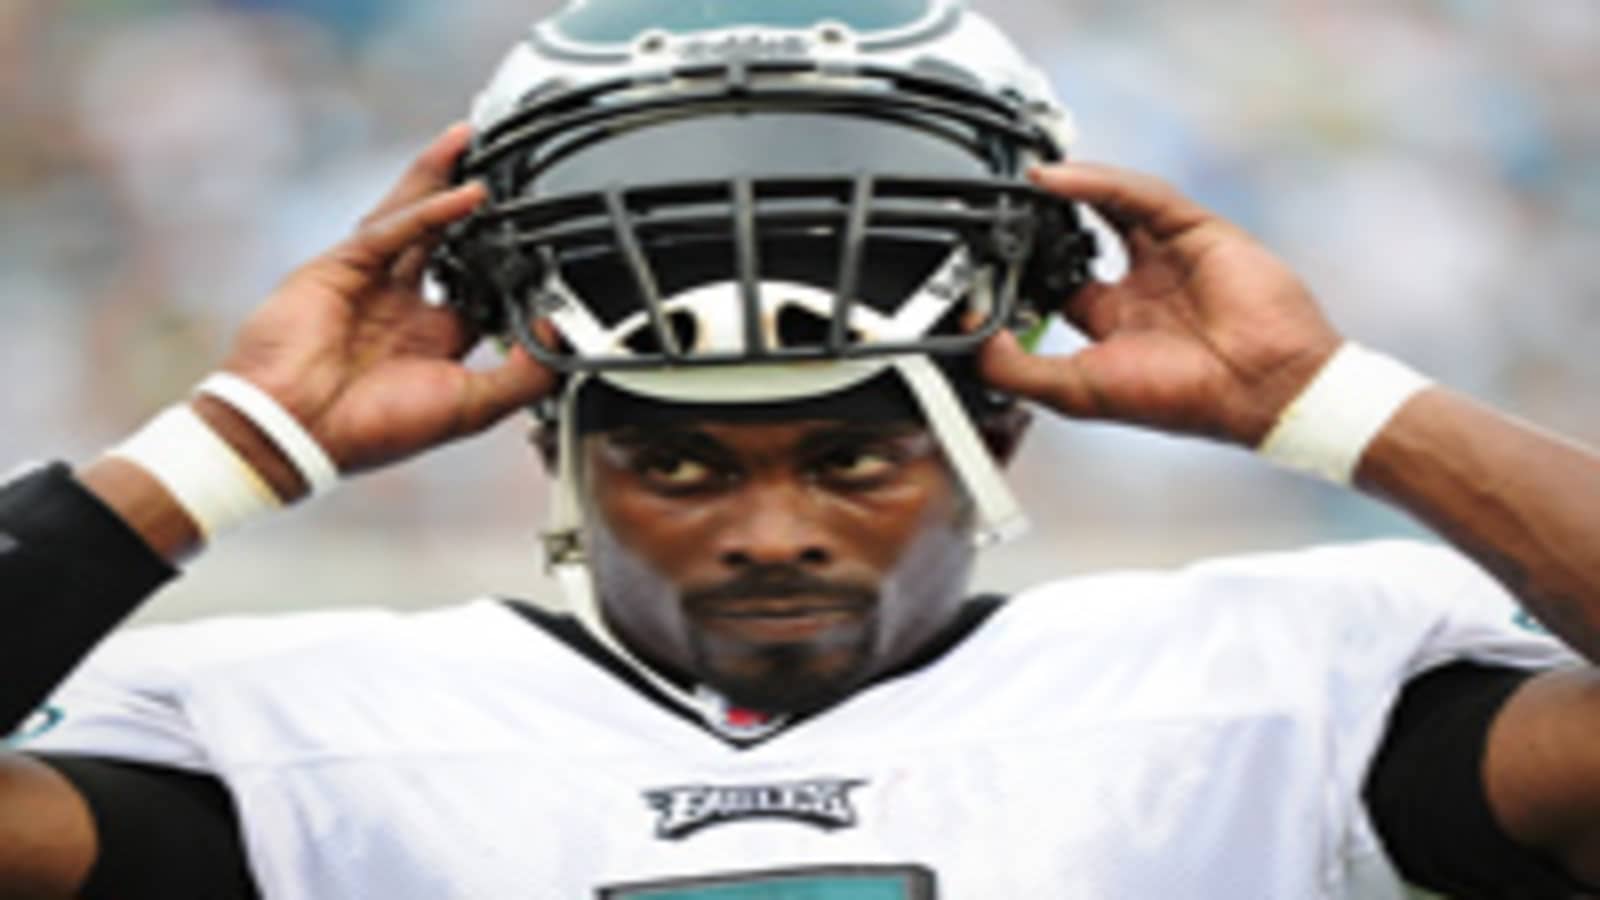 Exclusive: Nike Re-Signs Michael Vick (Updated)